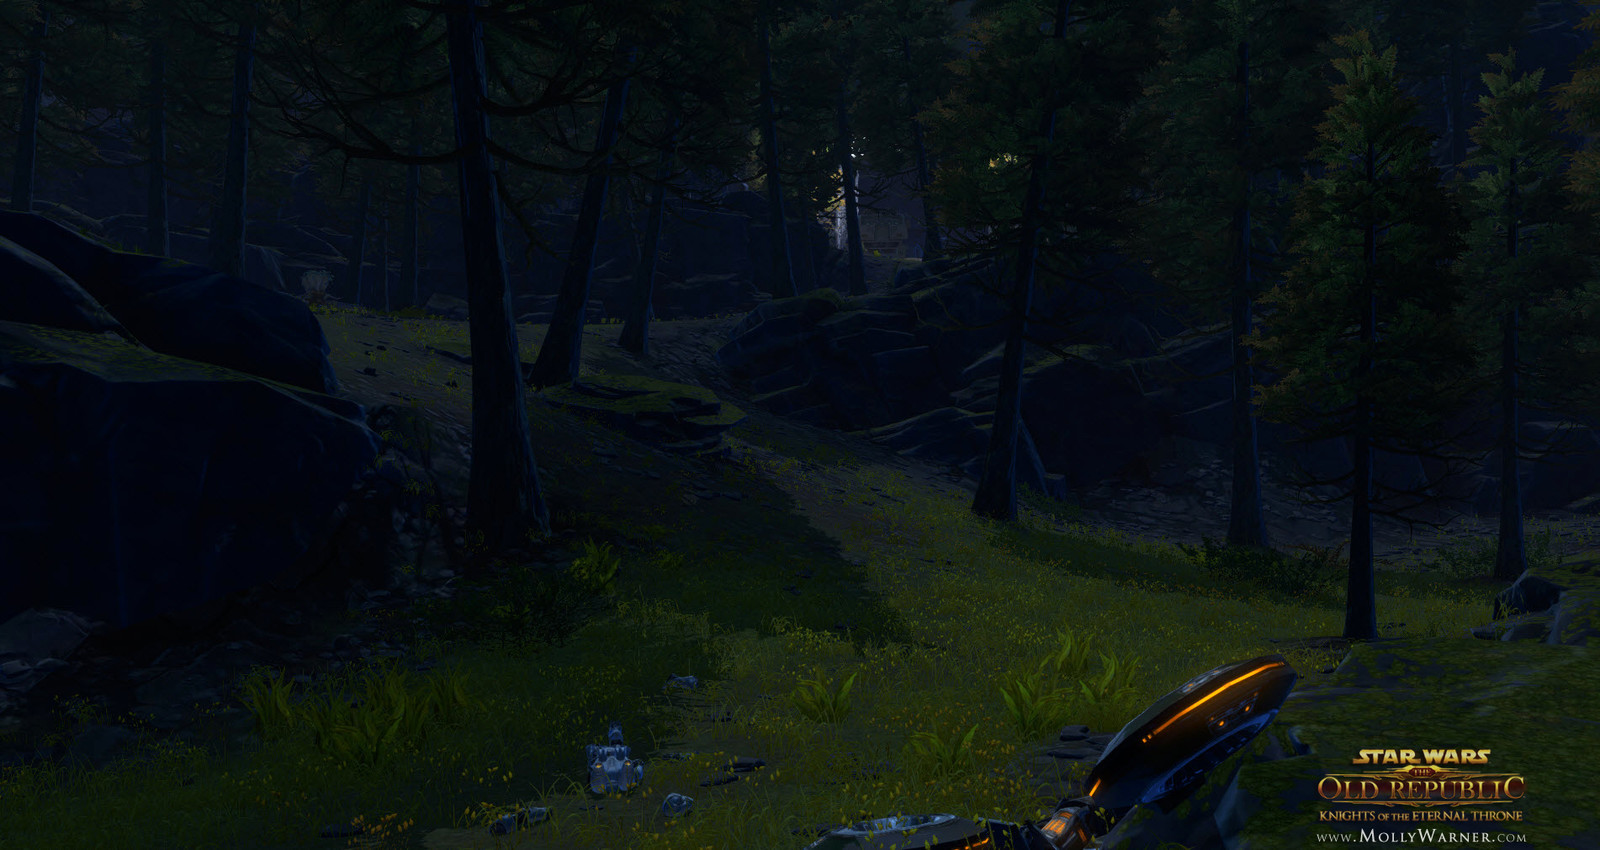 The forest around the player's ship is untouched by the Zakuulian forces